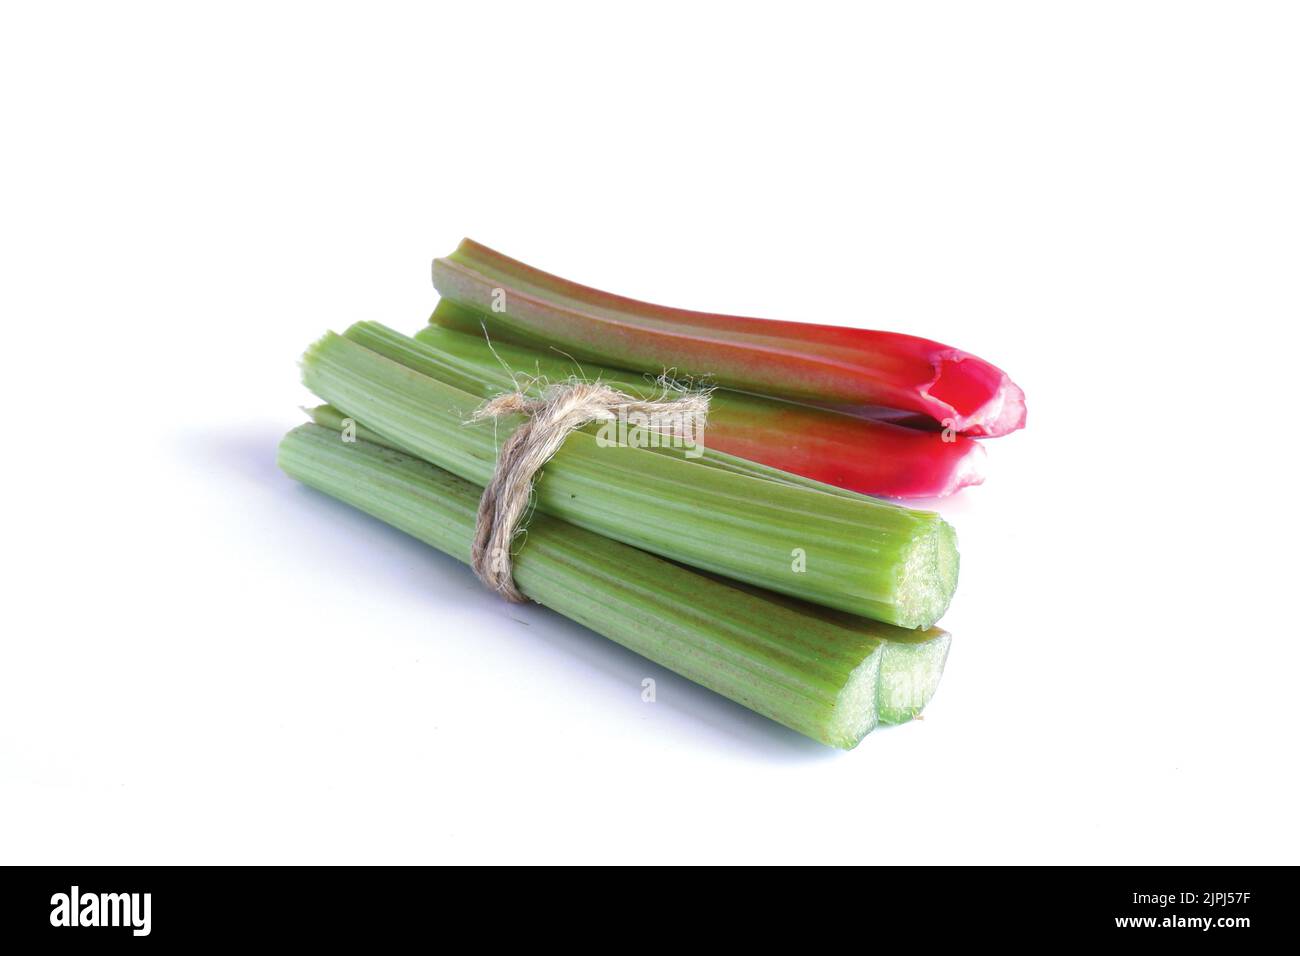 Red and green rhubarb stalks, tied with twine on a white background. Fresh useful plant from the garden.  Stock Photo